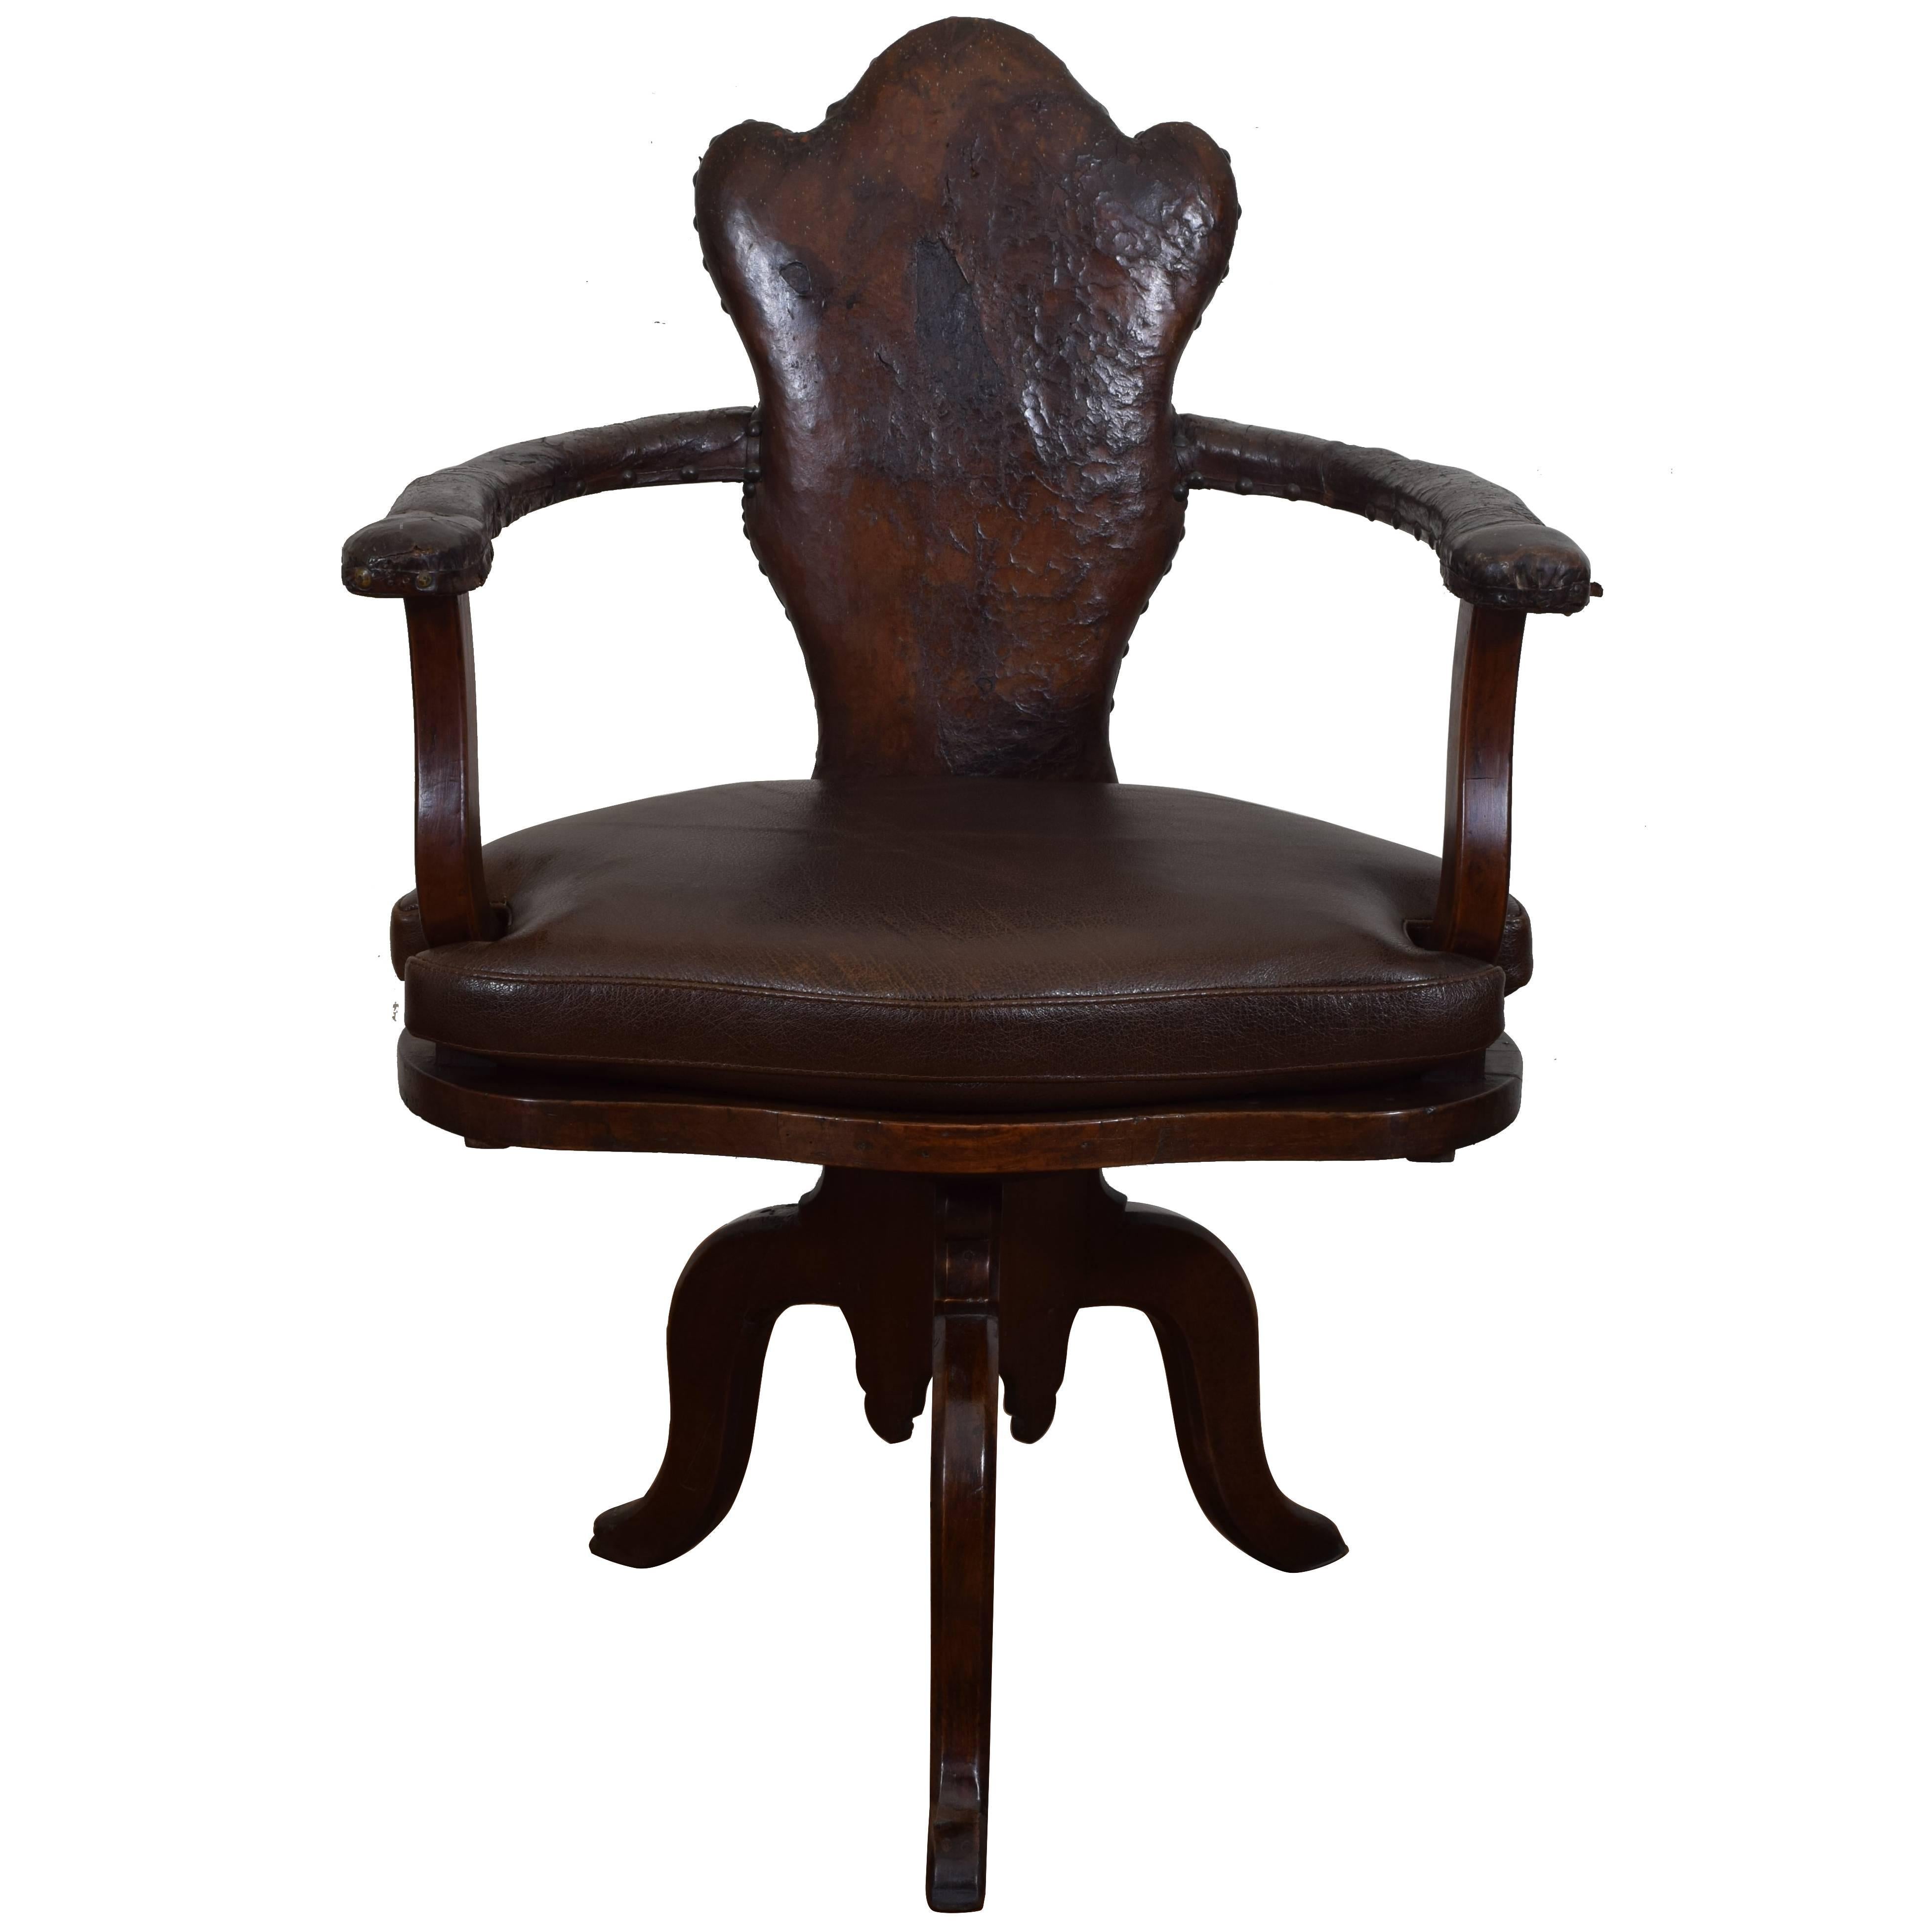 Italian Baroque Walnut and Leather Upholstered Swivel Chair, Early 17th Century